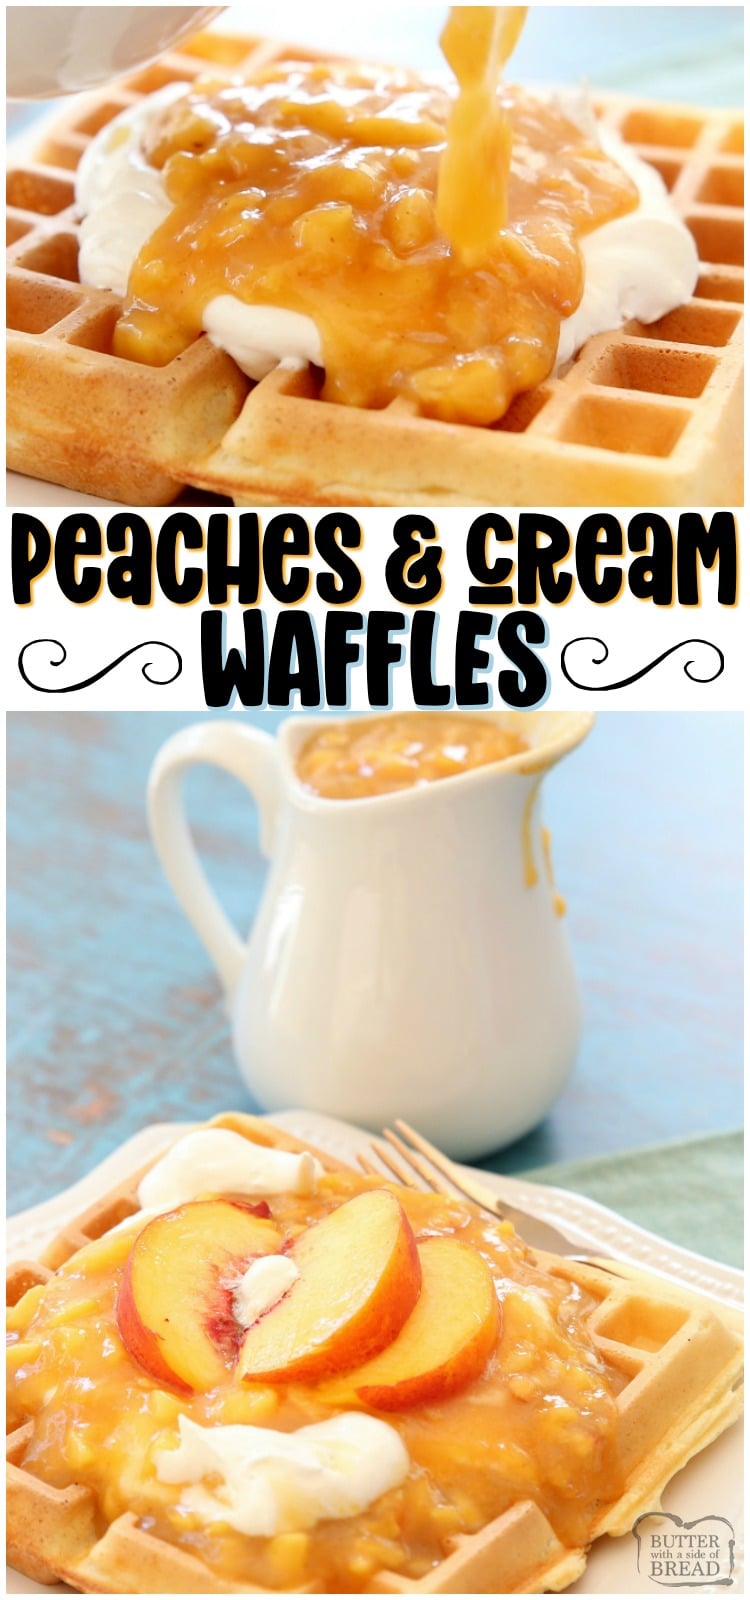 Peaches and Cream Waffles made with a crispy Belgian waffle recipe topped with a simple homemade chunky peach syrup and sweet cream. Perfect waffle recipe for special occasions and brunch!